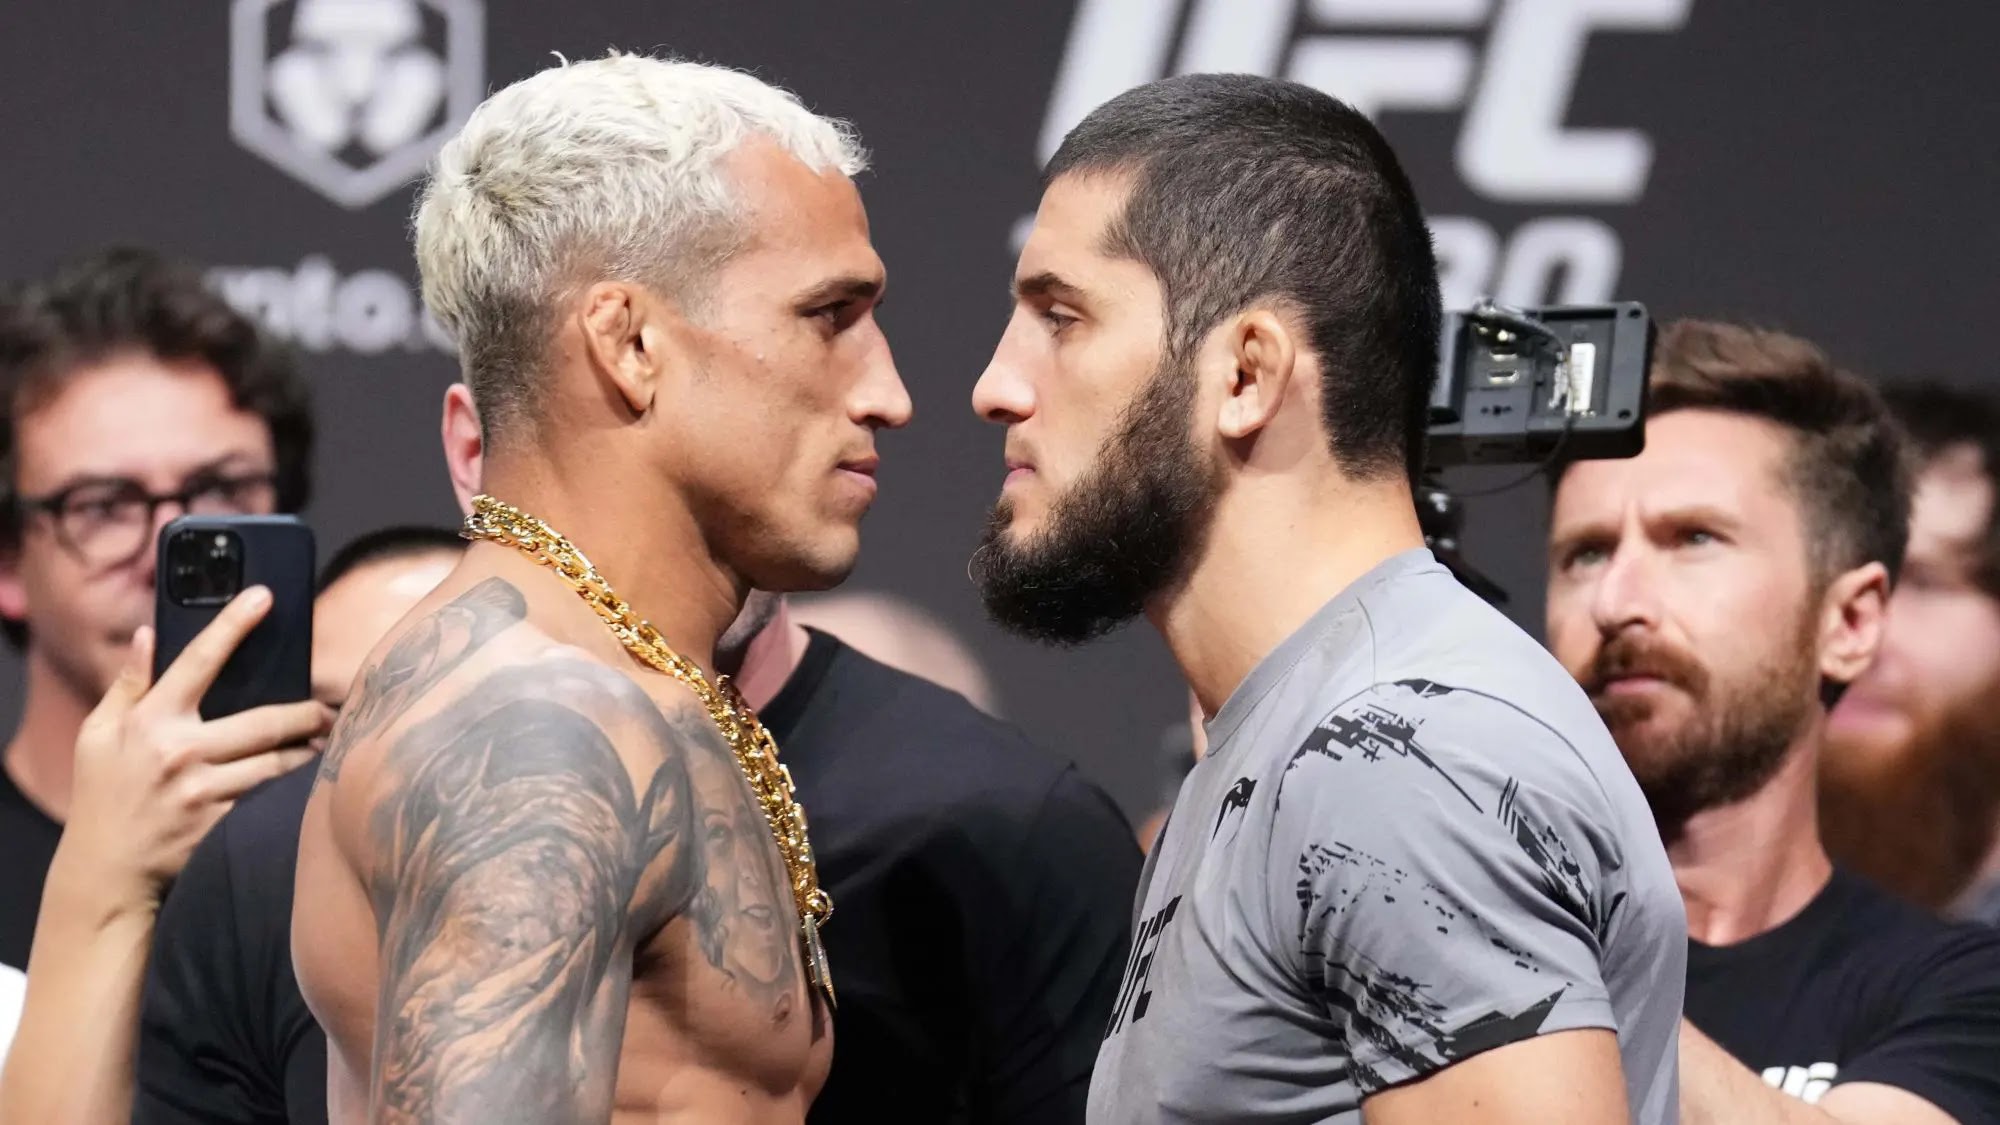 UFC 280 Fight Card: Charles Oliveira vs. Islam Makhachev, How To Watch, Start Time